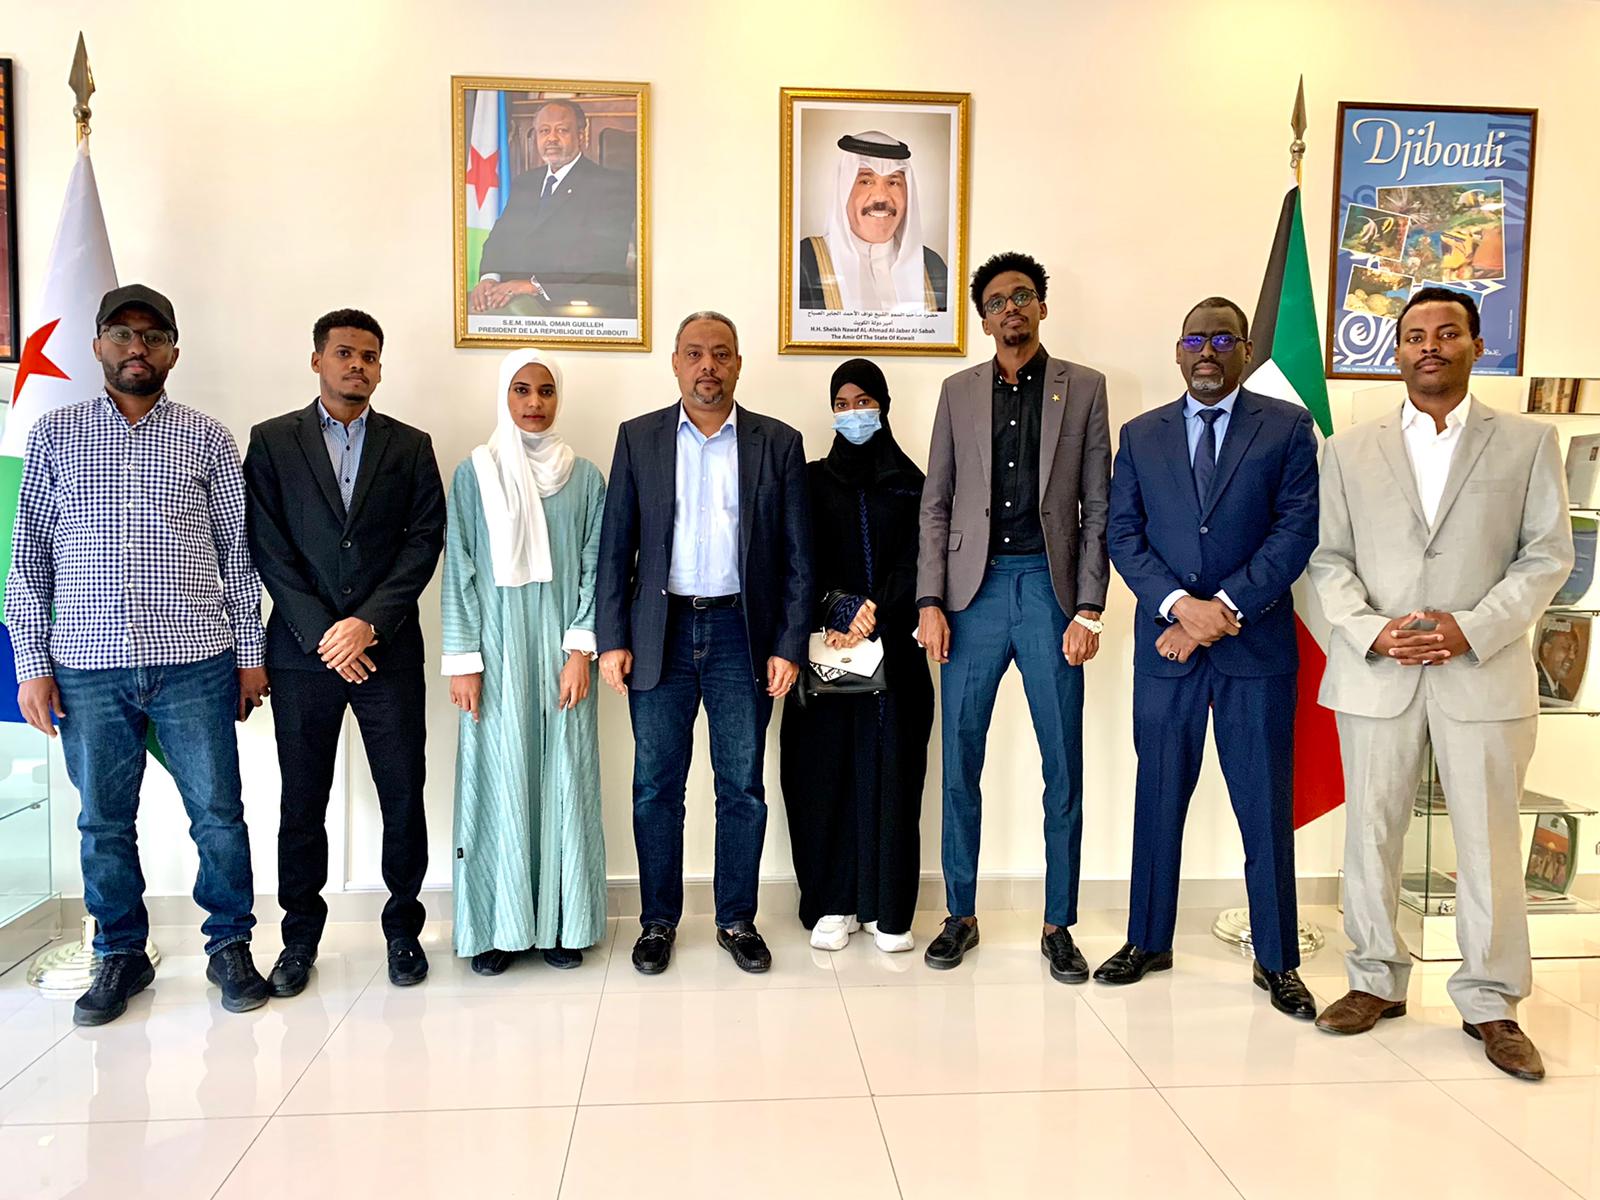 Visit of the Djiboutians Students to the Embassy